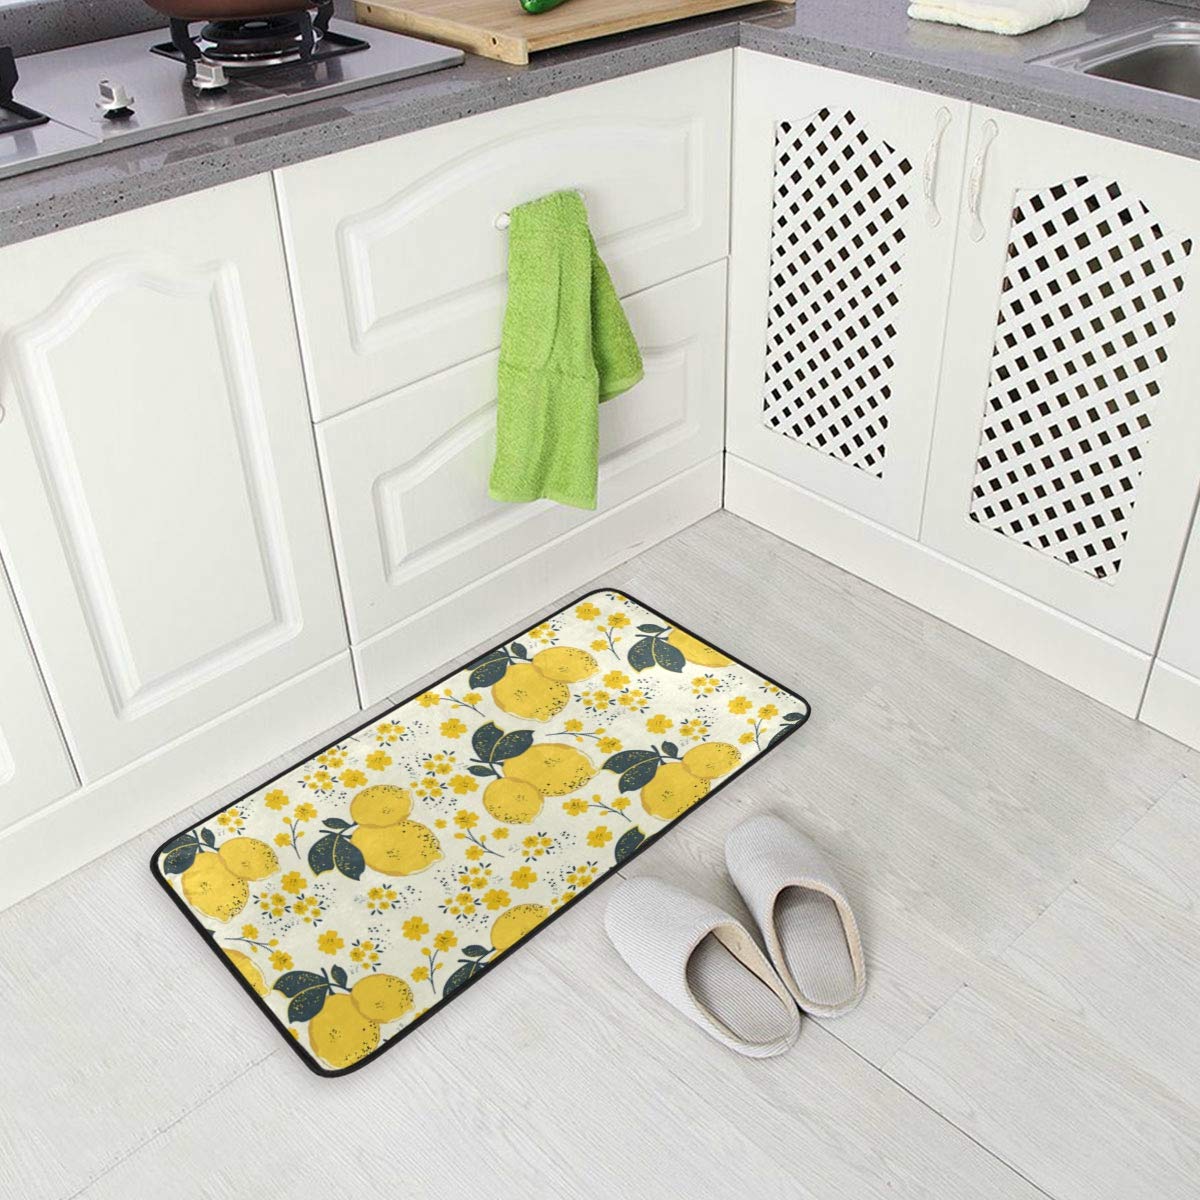 Yellow Lemons Kitchen Rugs Citrus Pattern with Summer Colorful Flowers Kitchen Mats Non-Slip Bath Runner Rug Doormats Area Mat Rugs Carpet for Home Decor 39" X 20"